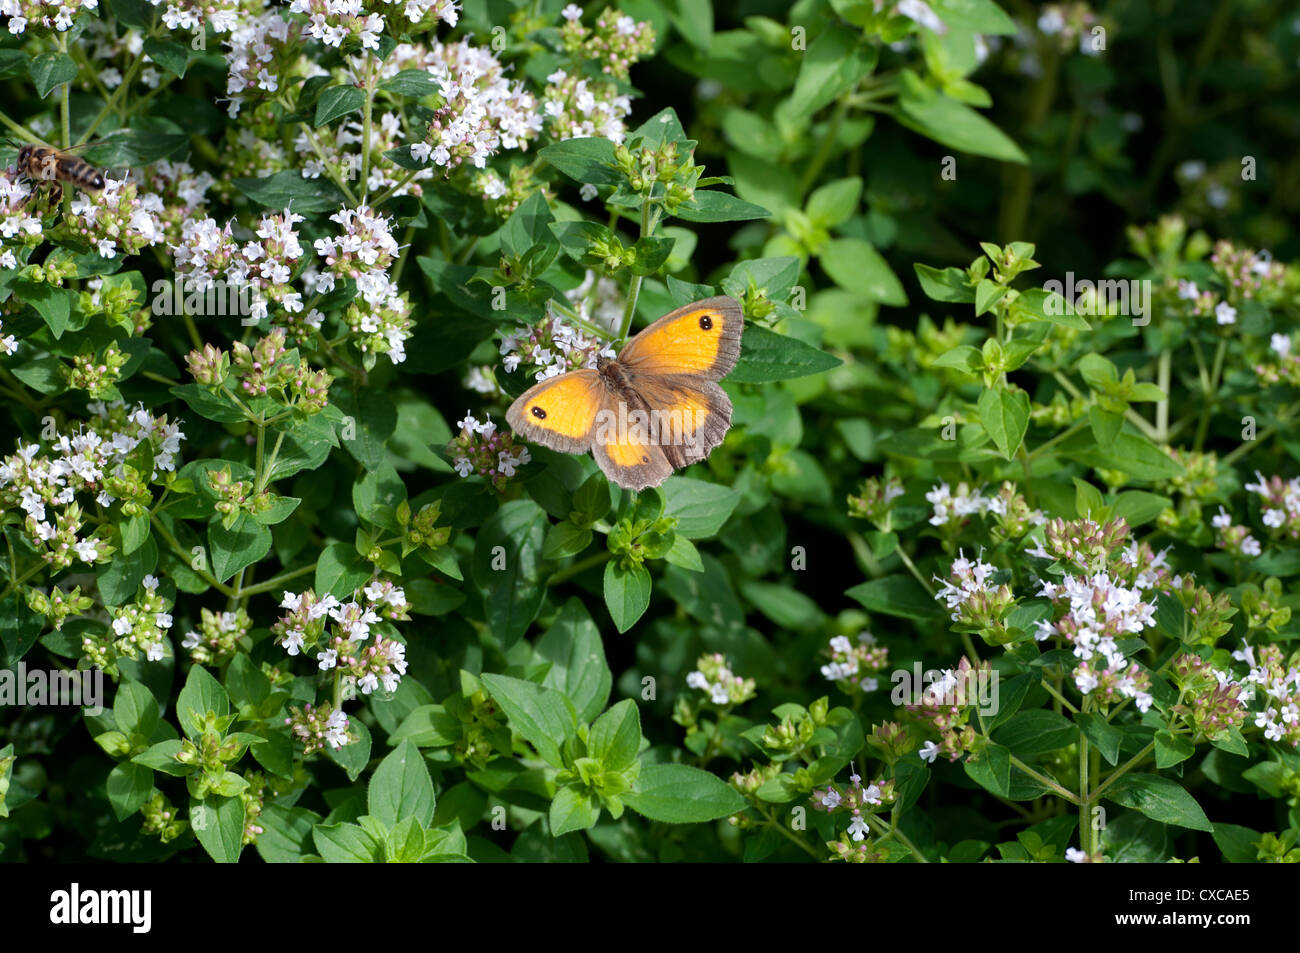 Hedge Brown or Gatekeeper butterfly (Pyronia tithonus) on Marjoram plant Stock Photo